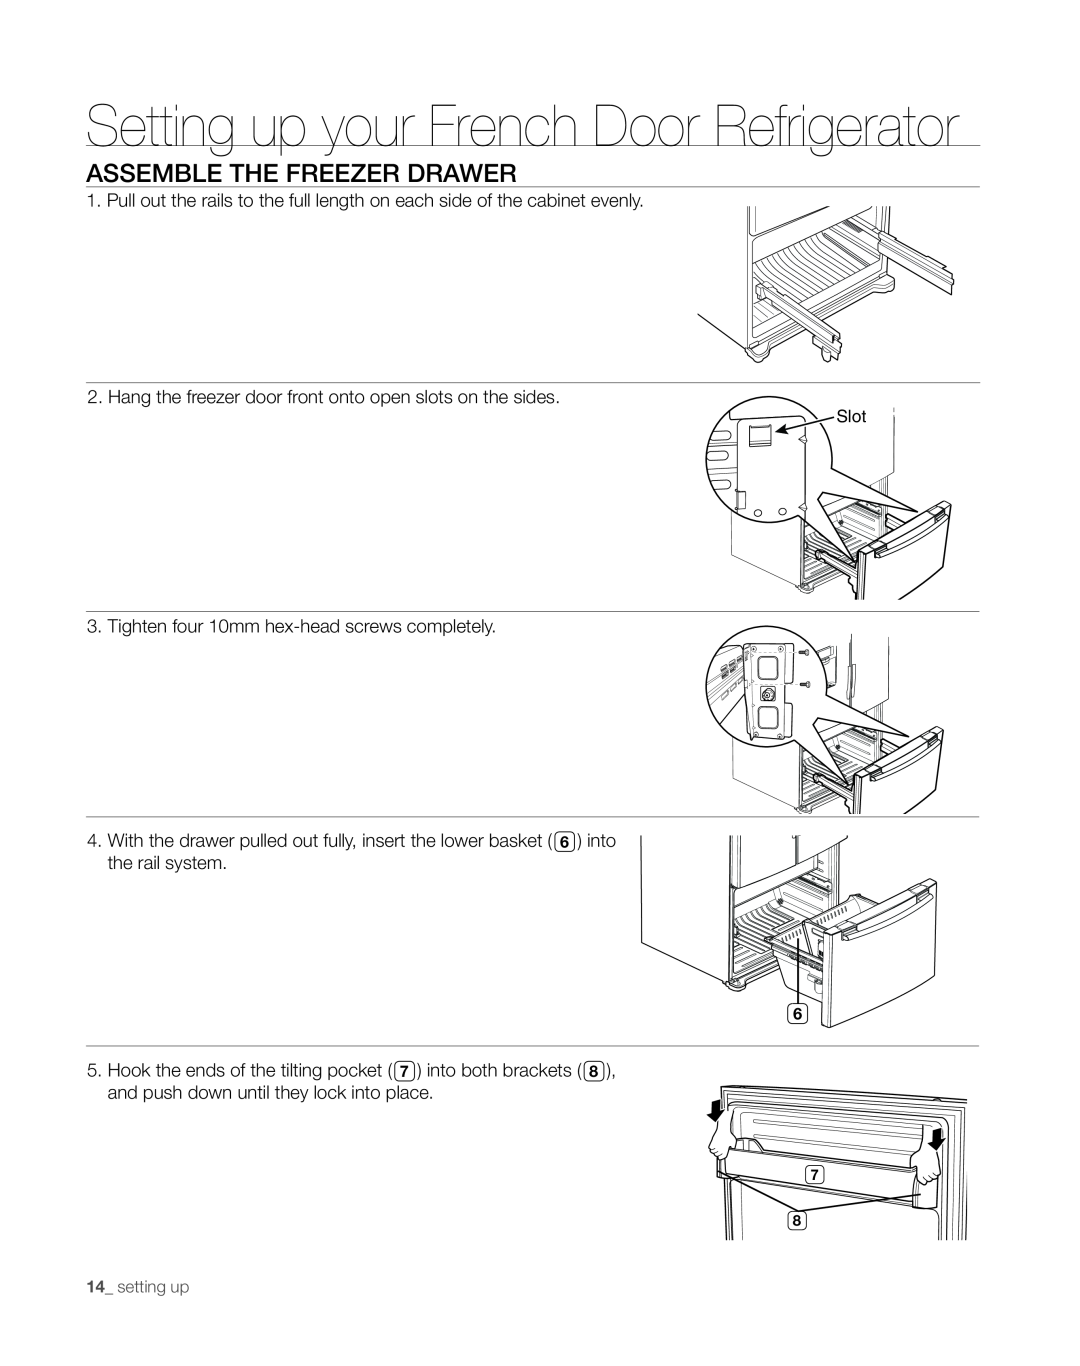 Sears RFG297AA manual assemble the freezer drawer, Setting up your French Door Refrigerator 